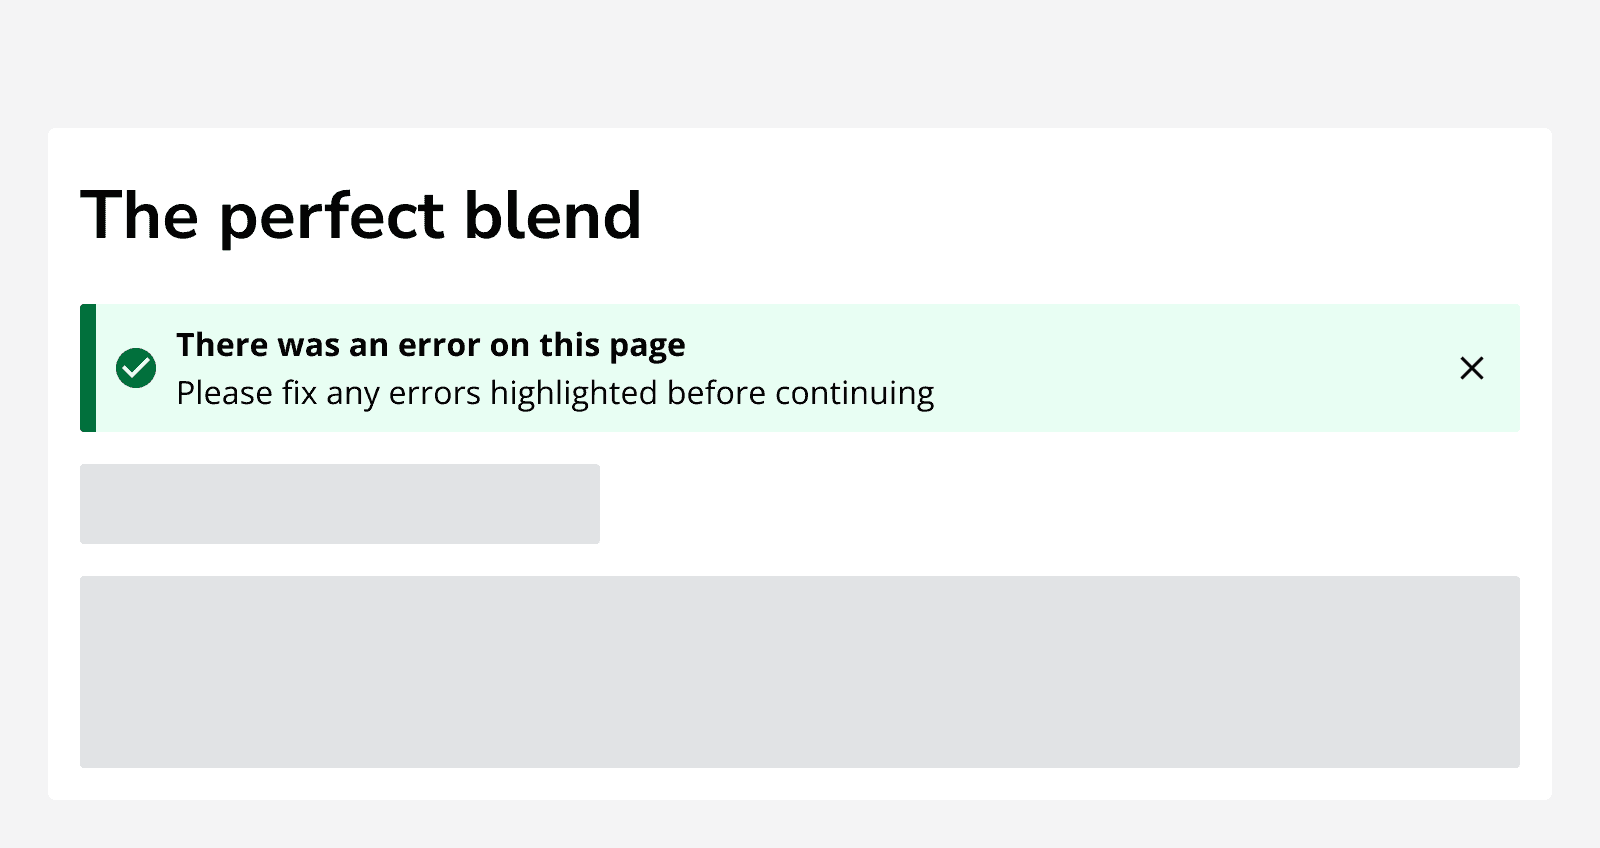 A form titled ‘The perfect blend’ that contains 2 skeletons. A success alert shows an error message that says ‘There was an error on this page. Please fix any errors highlighted before continuing.’